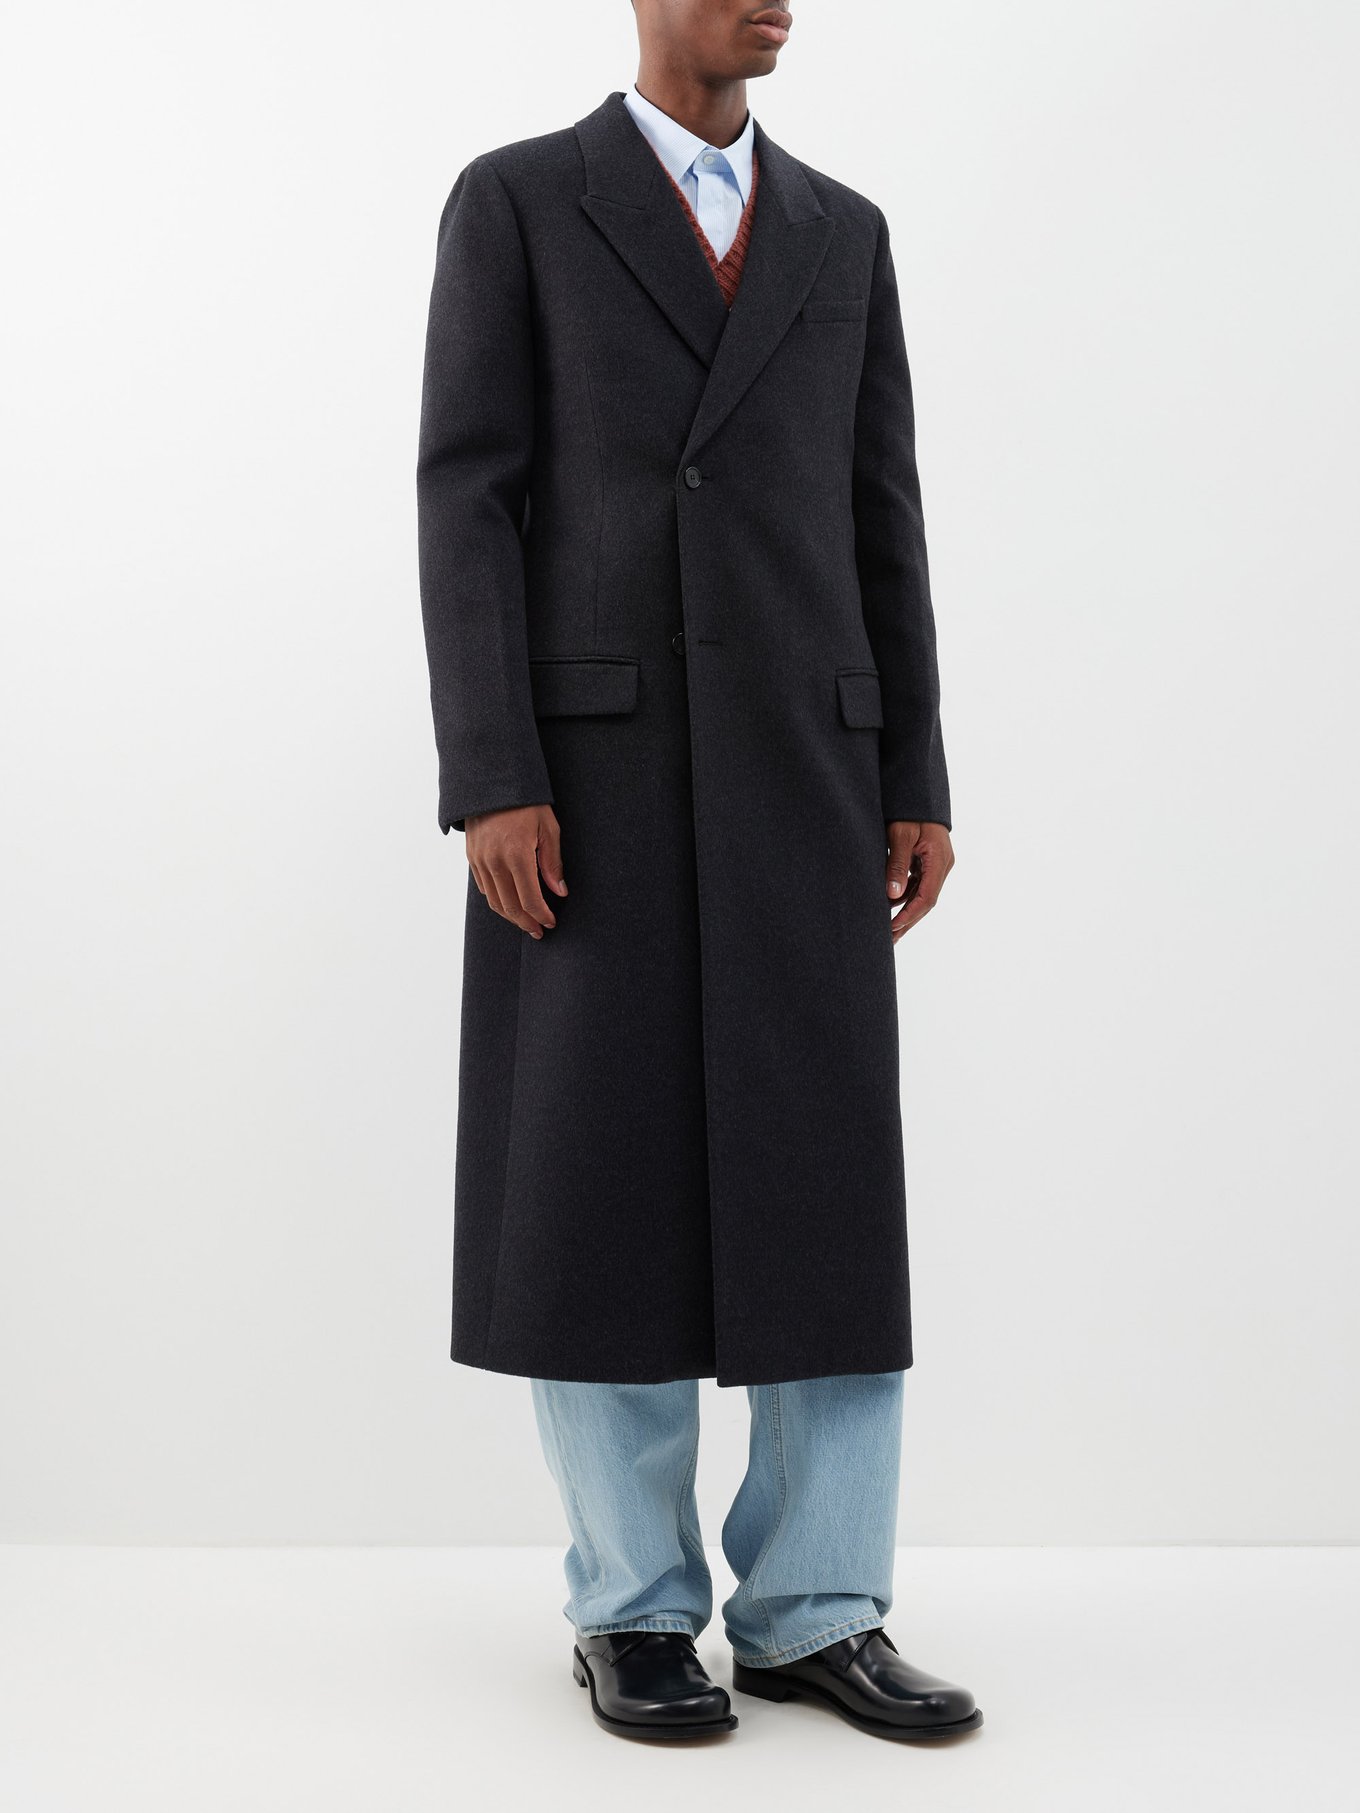 Lanvin Single-Breasted Tailored Cashmere Coat